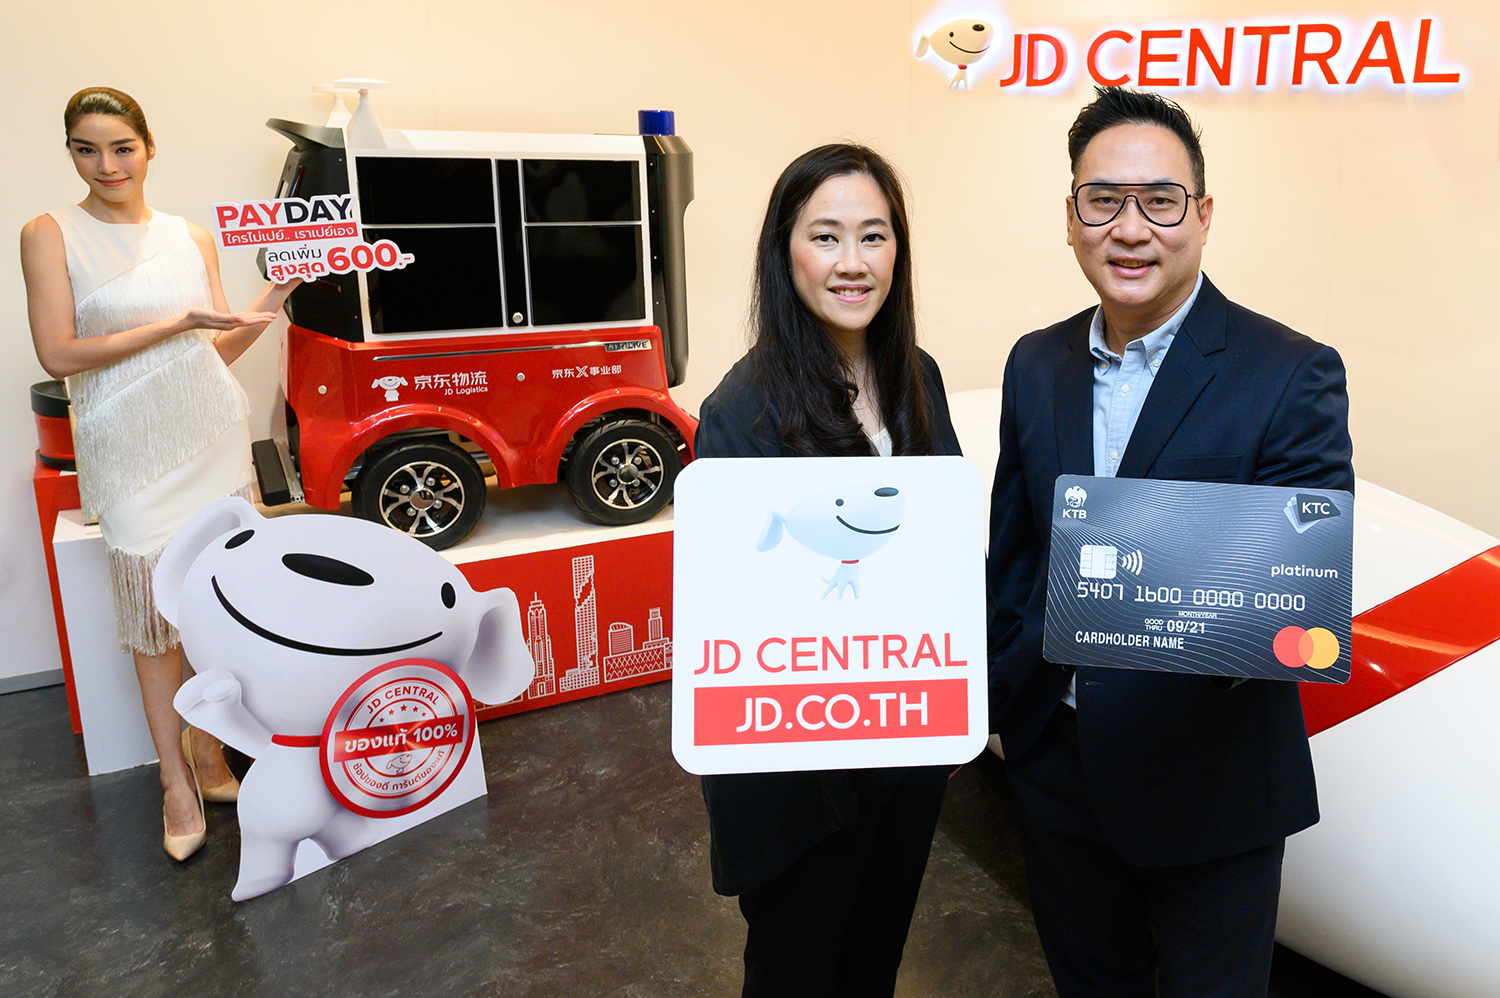 KTC pleases KTC MASTERCARD cardmembers with value online shopping promotions on the JD CENTRAL platform.